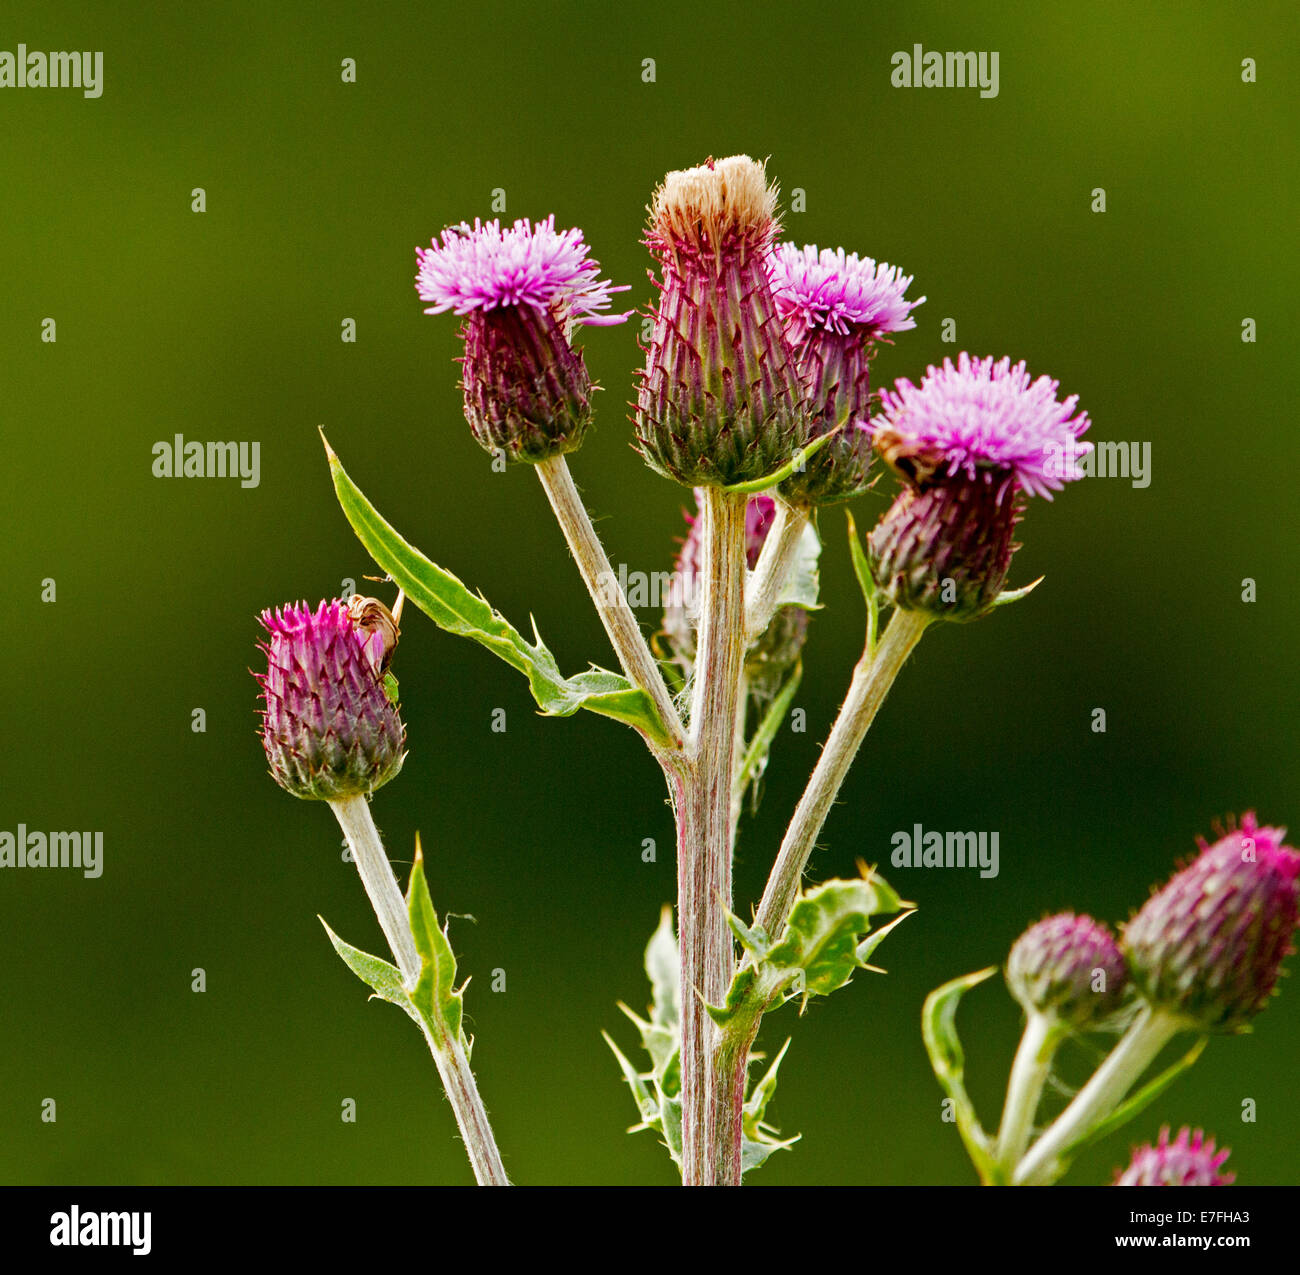 British wildflowers, cluster of flowers of welted thistle, Carduus acanthoides, against green background near Buntsland Scotland Stock Photo